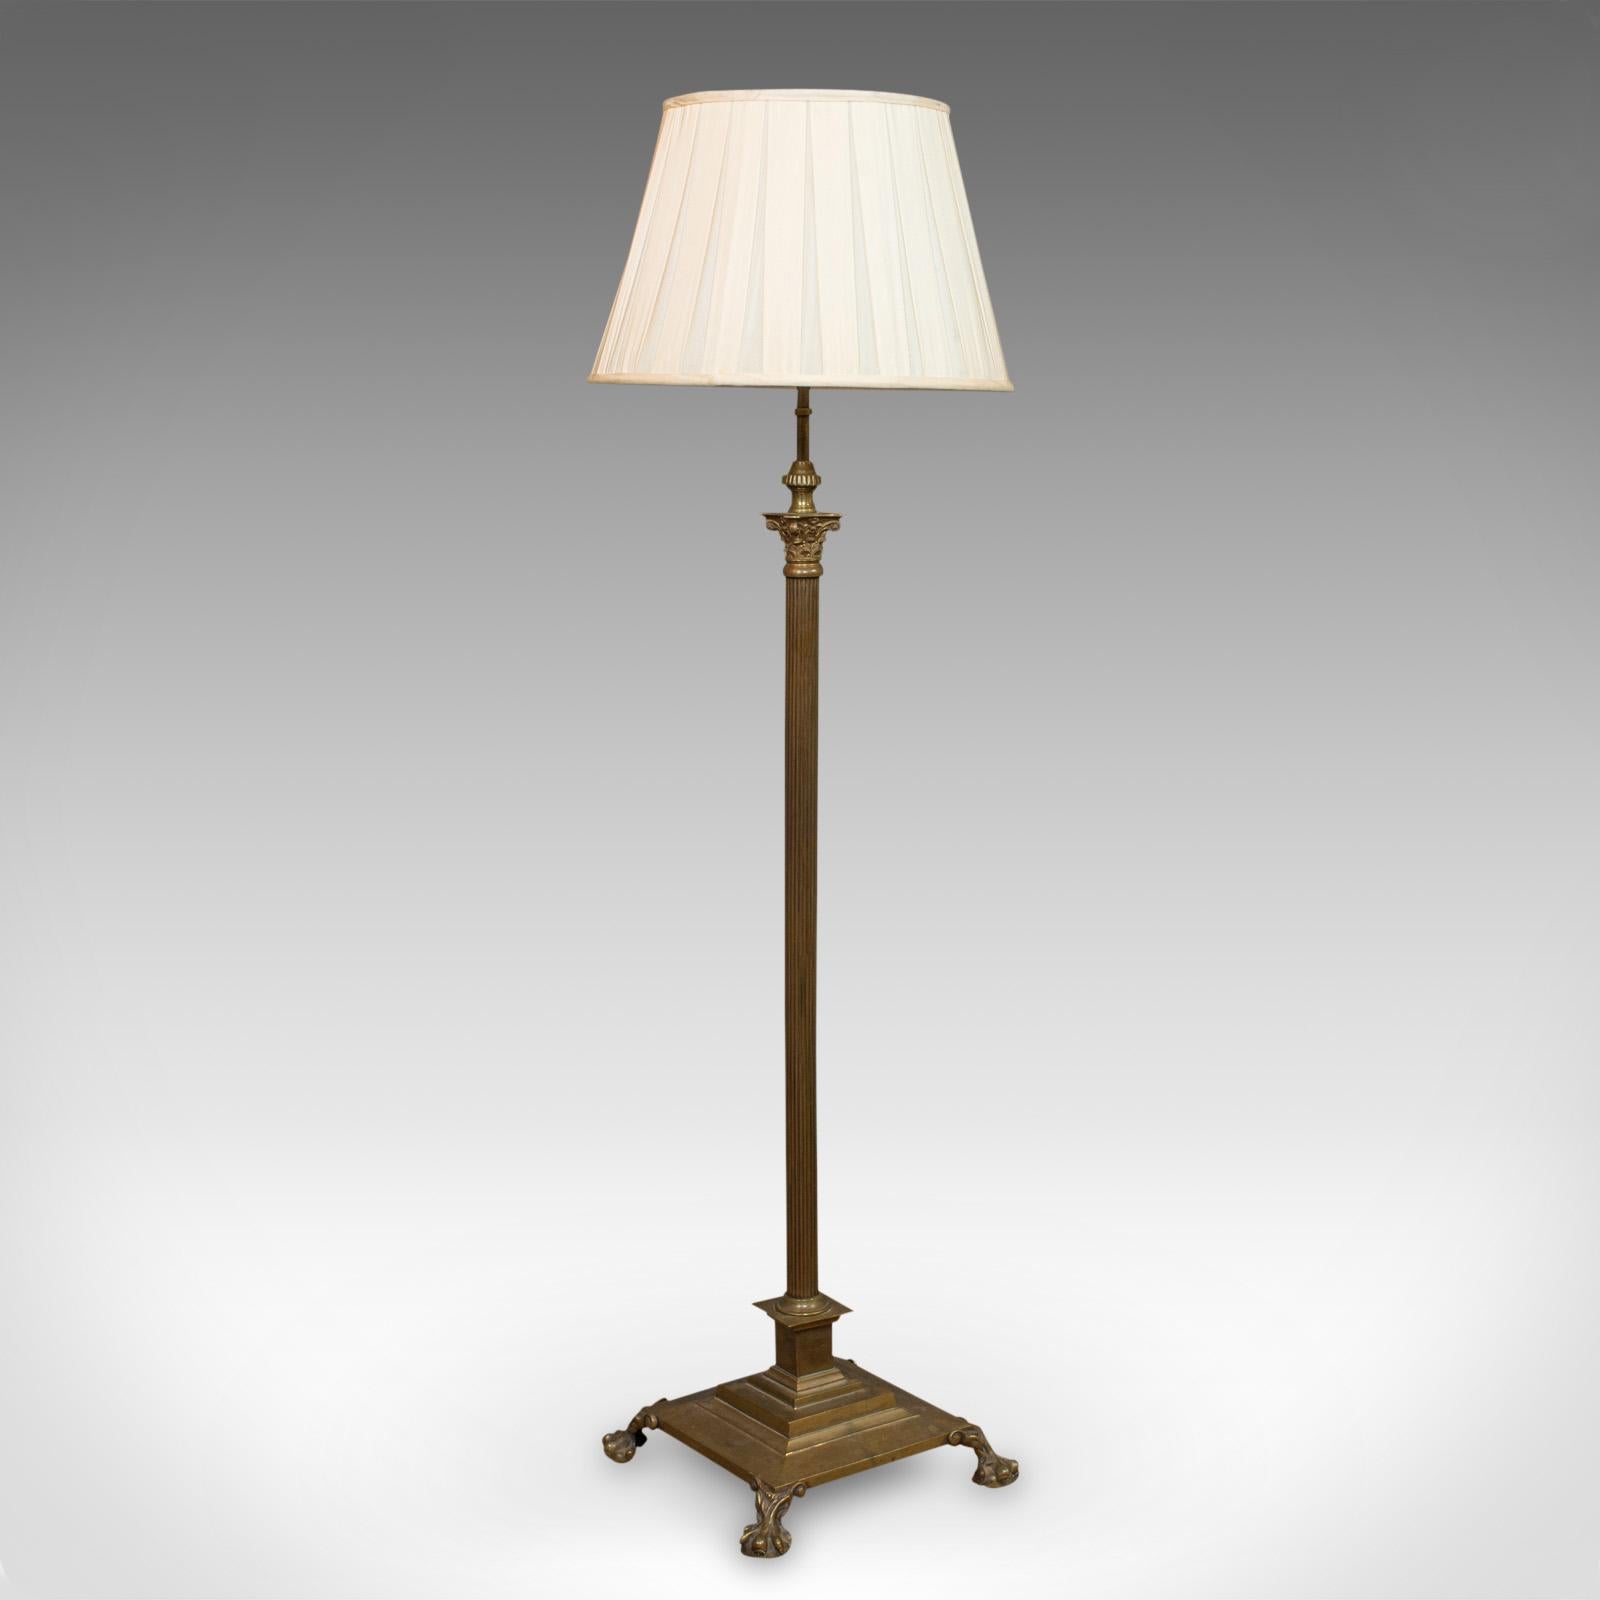 This is an antique standard lamp. An English, brass adjustable floor light, dating to the Edwardian period, circa 1910.

Period Edwardian standard lamp
Displays a desirable aged patina
Brass podium and fluted column in Corinthian